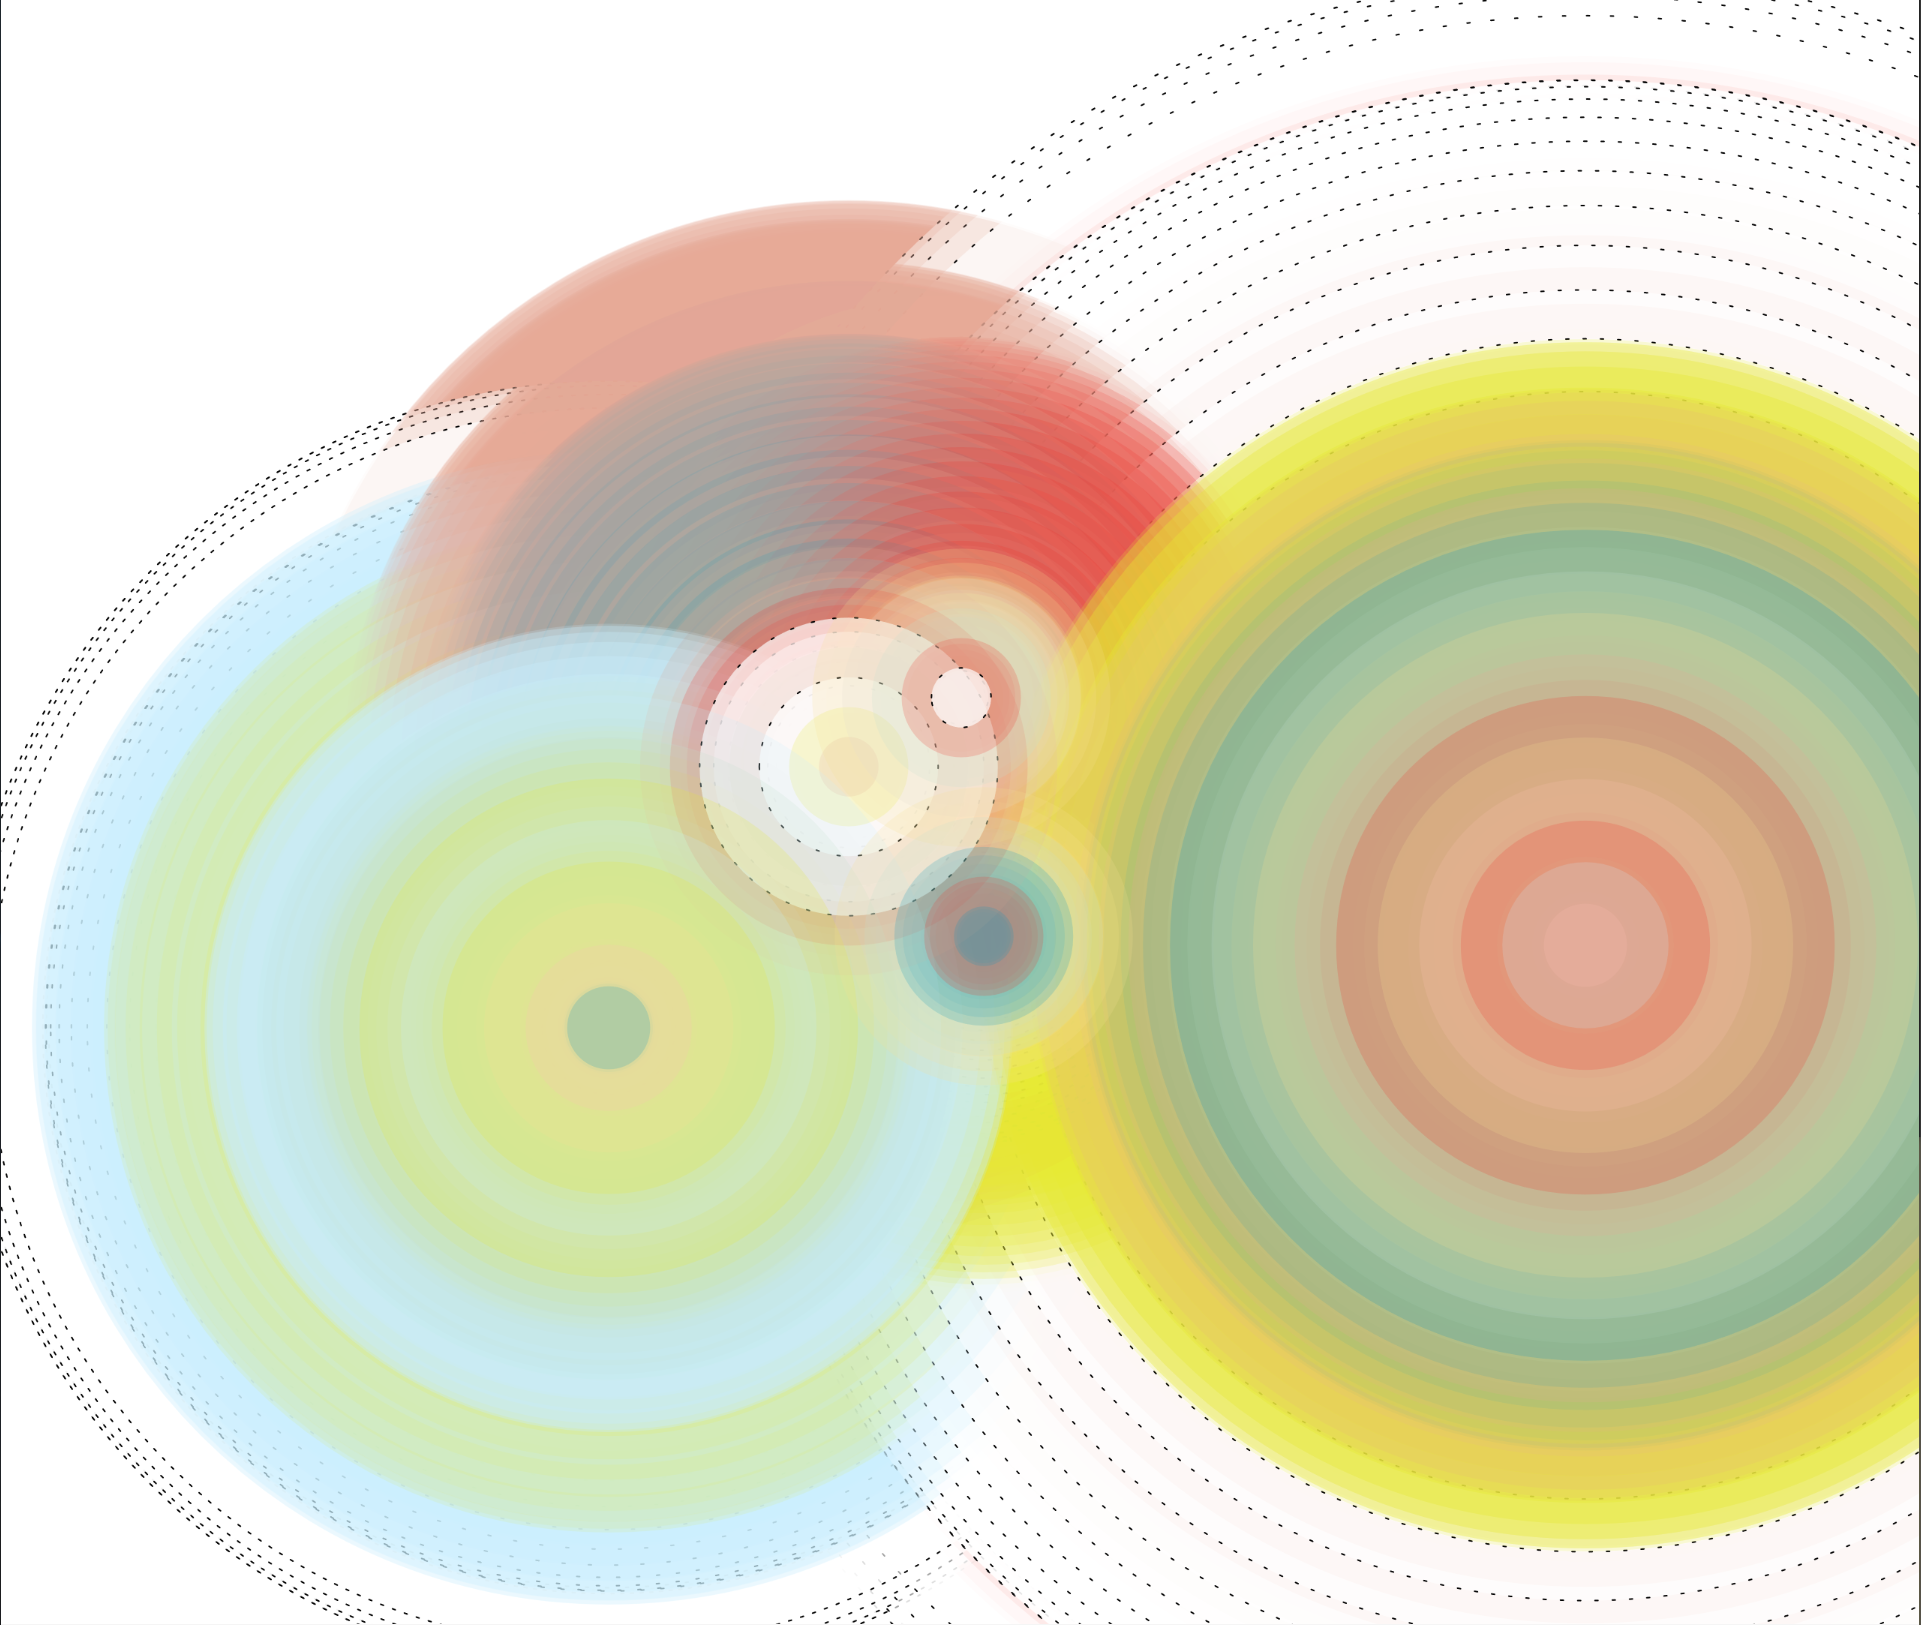 Several colorful overlapping circles